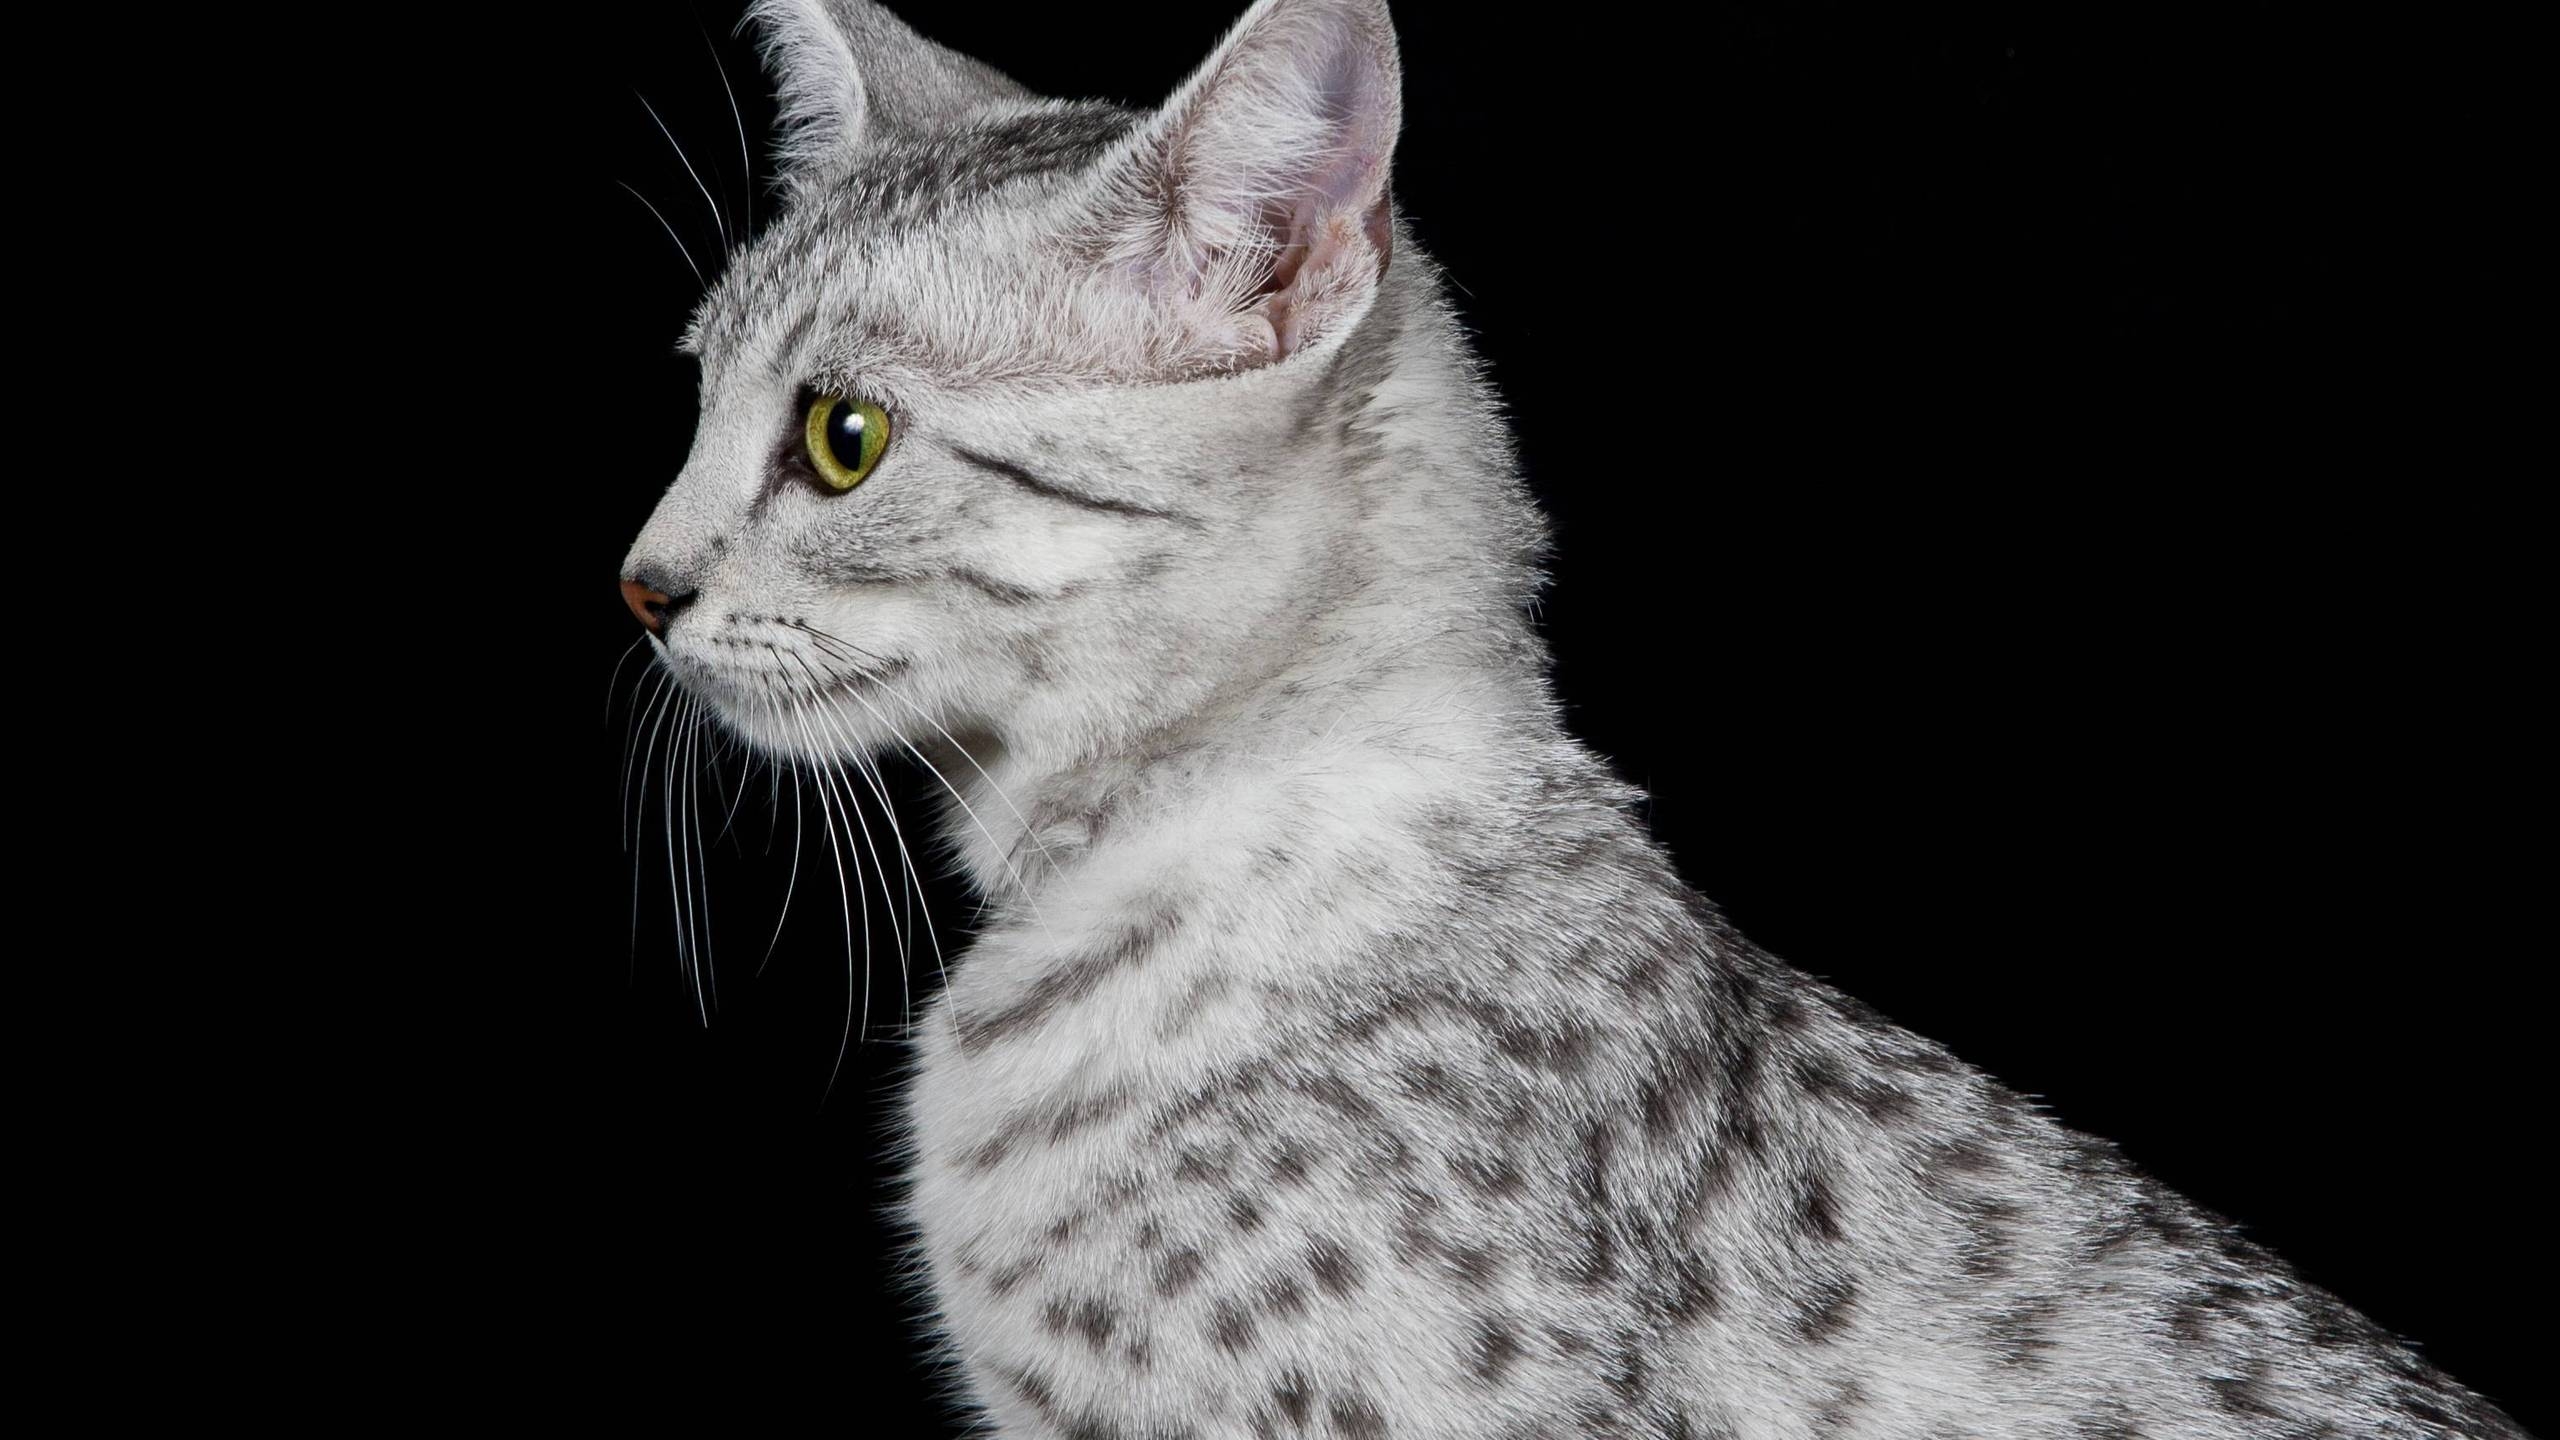 Egyptian Mau Cat Profile Look for 2560x1440 HDTV resolution